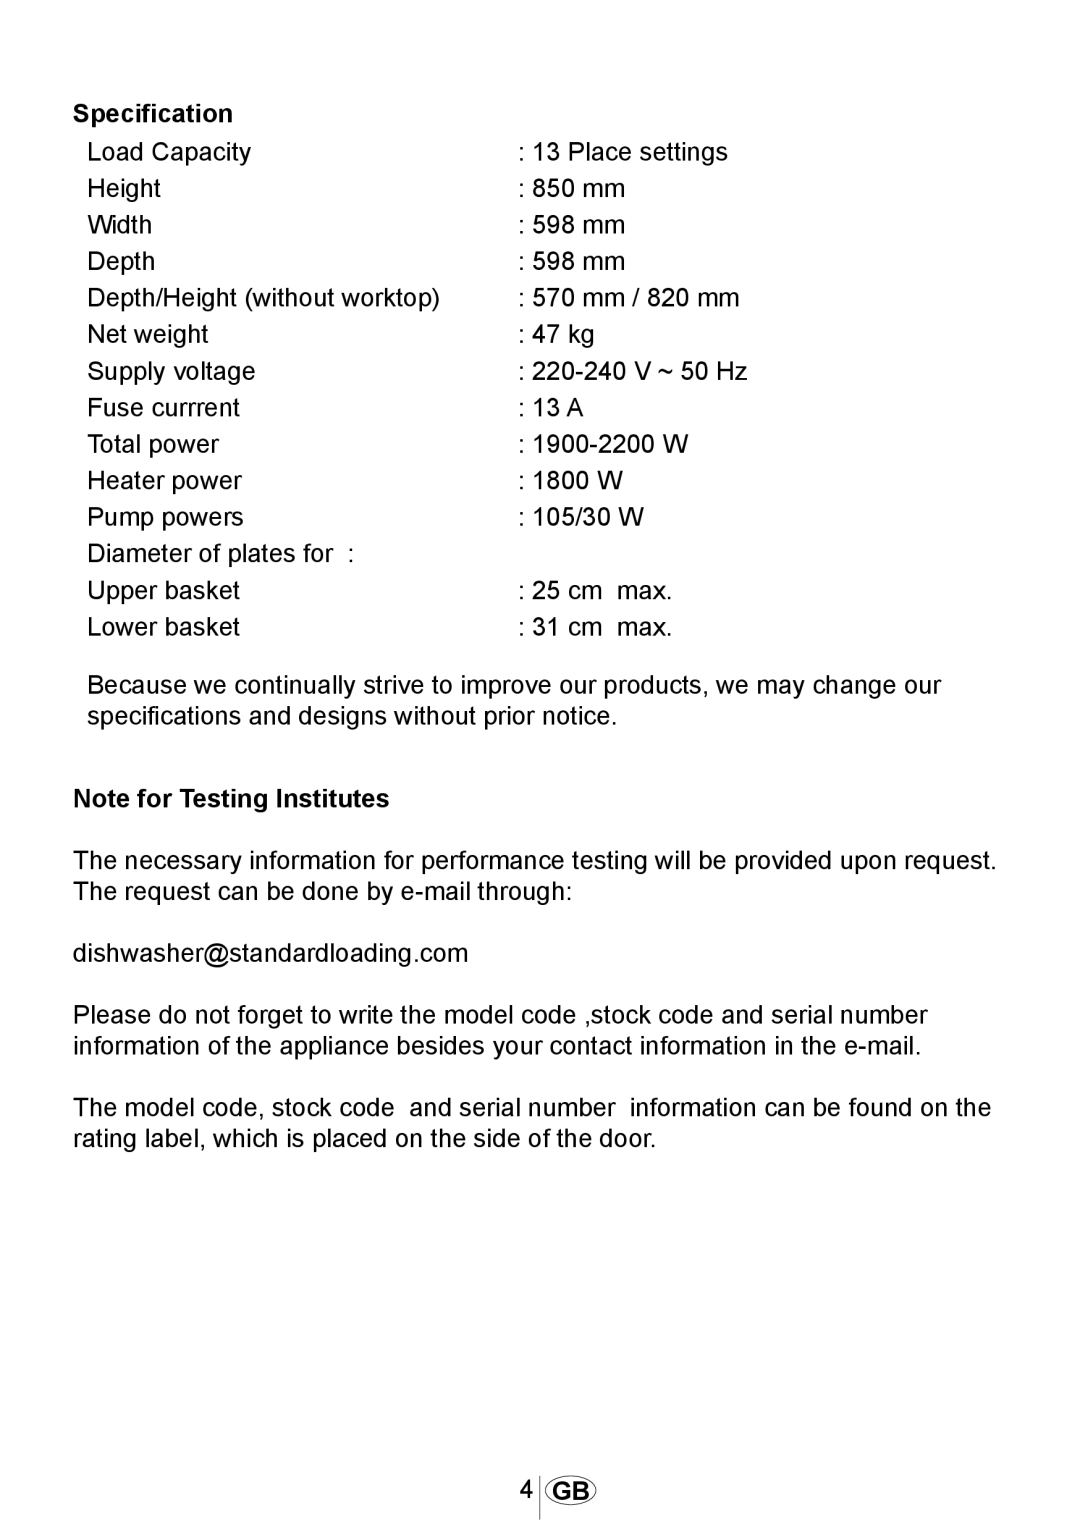 Beko DSFN 6830 manual Specification, Note for Testing Institutes 